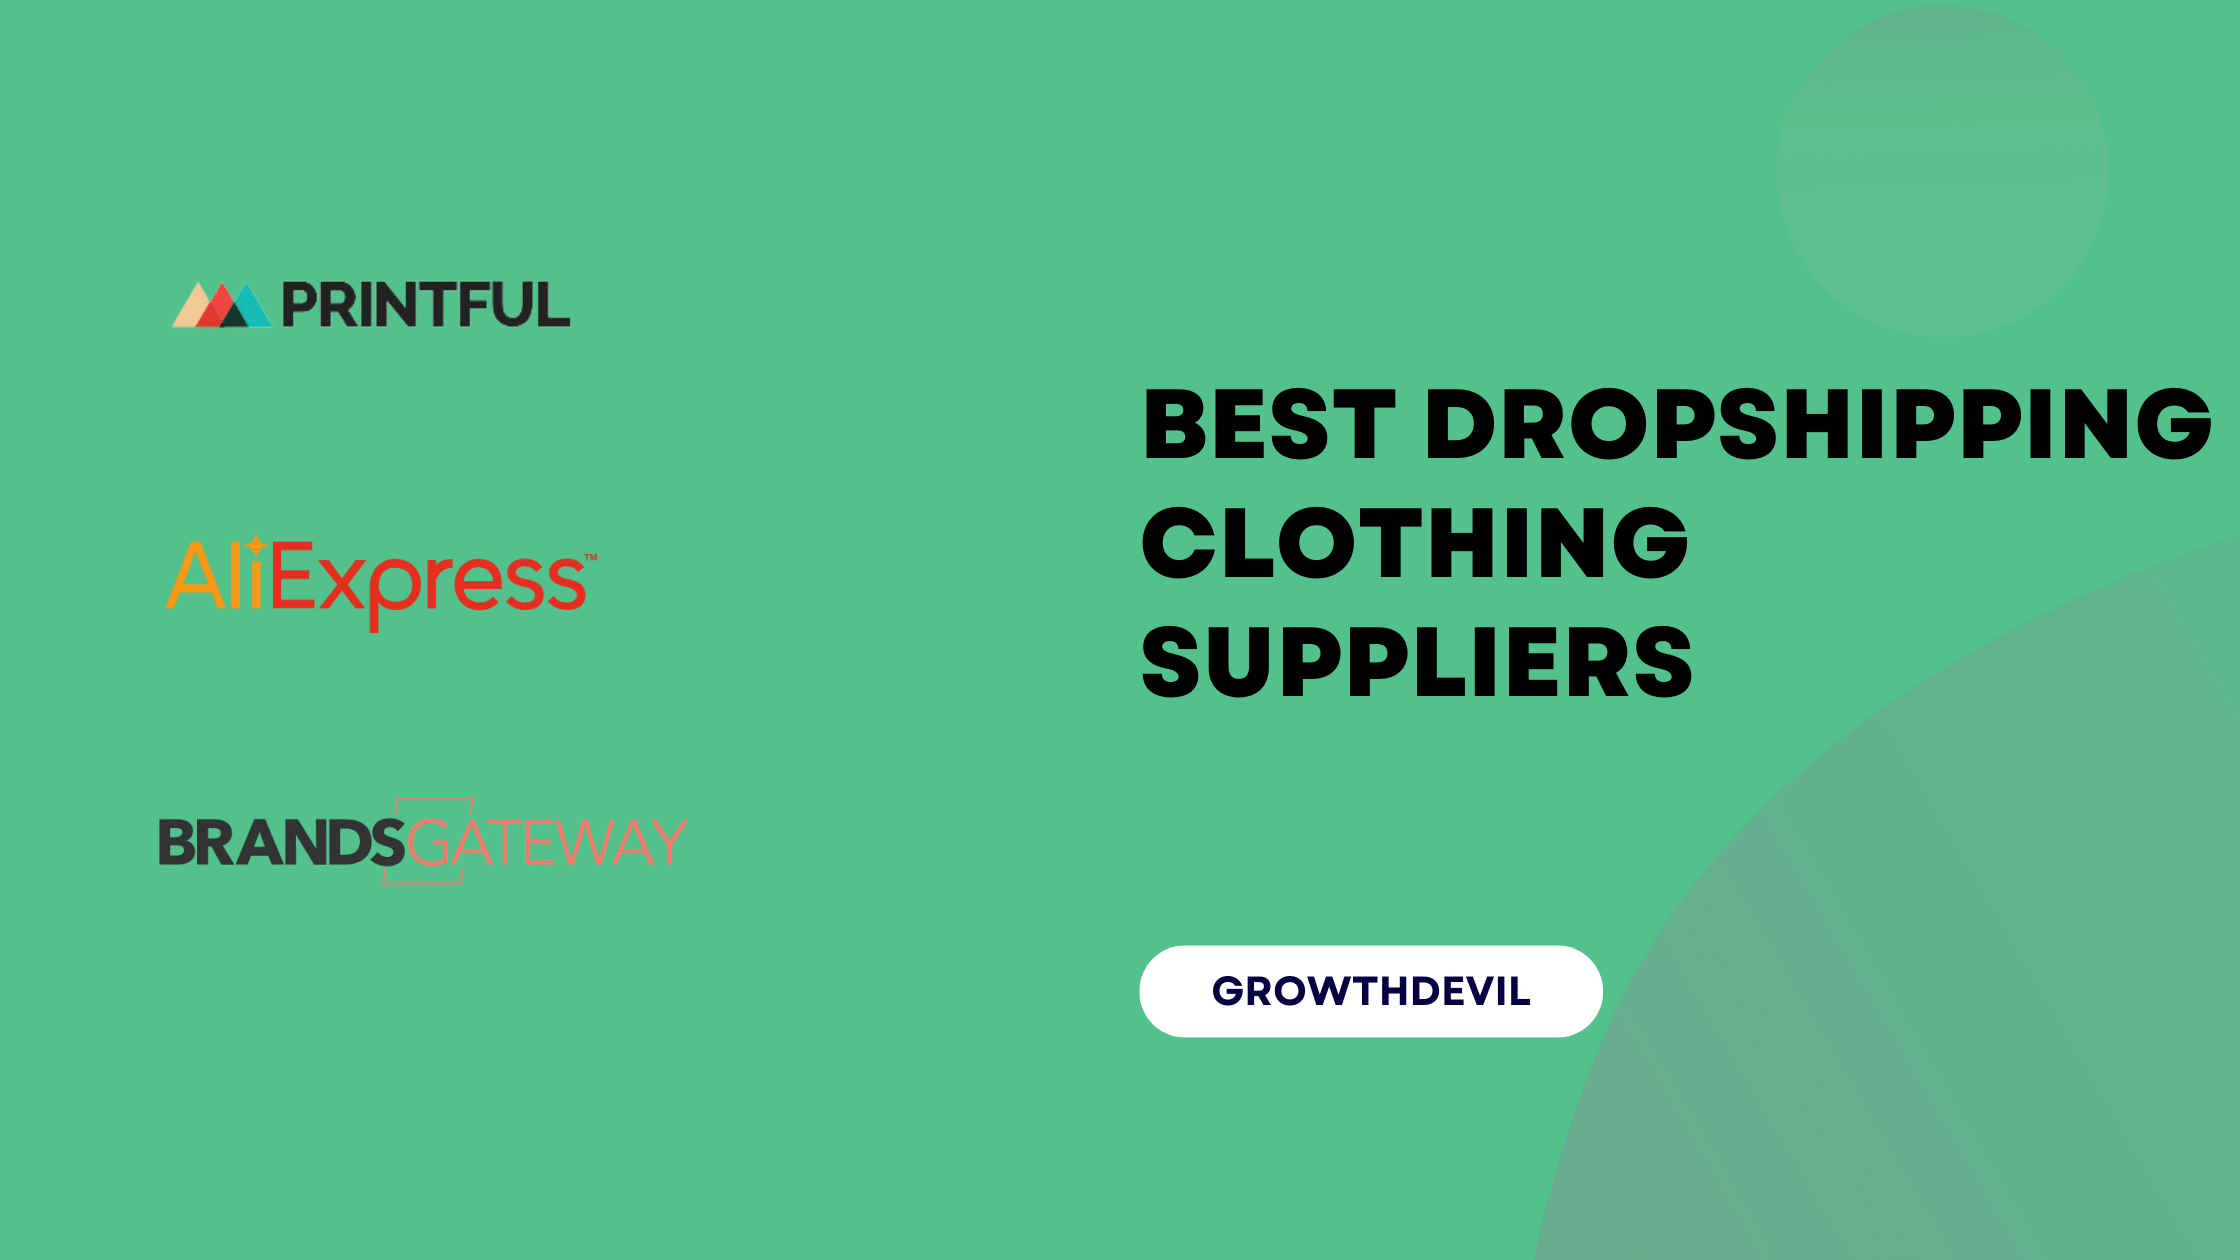 Best Dropshipping Clothing Suppliers - GrowthDevil